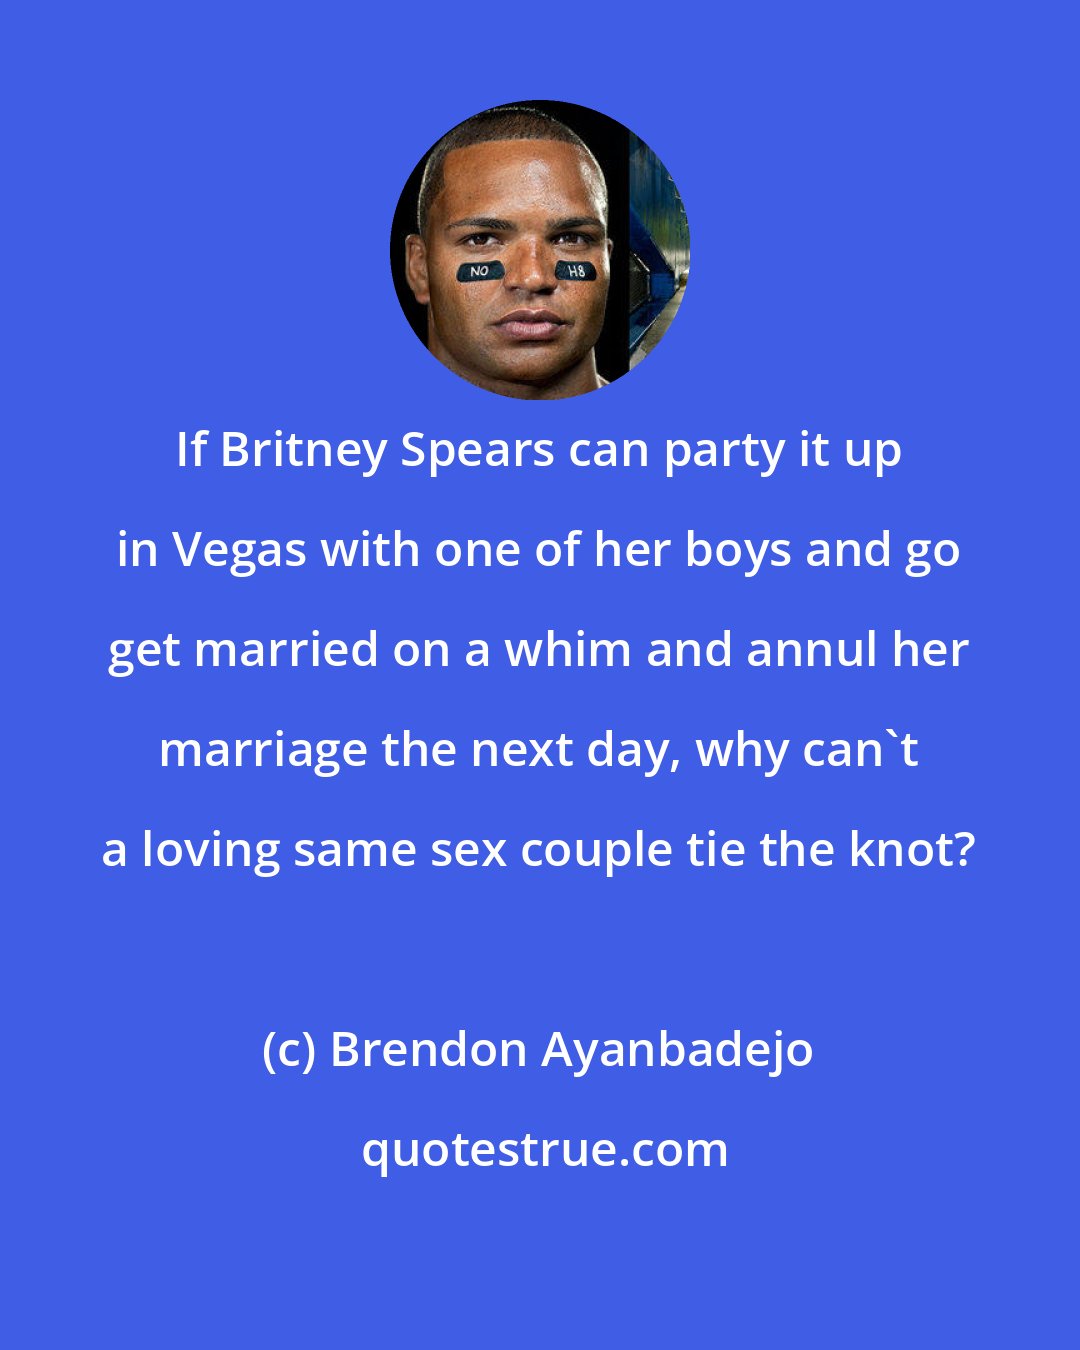 Brendon Ayanbadejo: If Britney Spears can party it up in Vegas with one of her boys and go get married on a whim and annul her marriage the next day, why can't a loving same sex couple tie the knot?